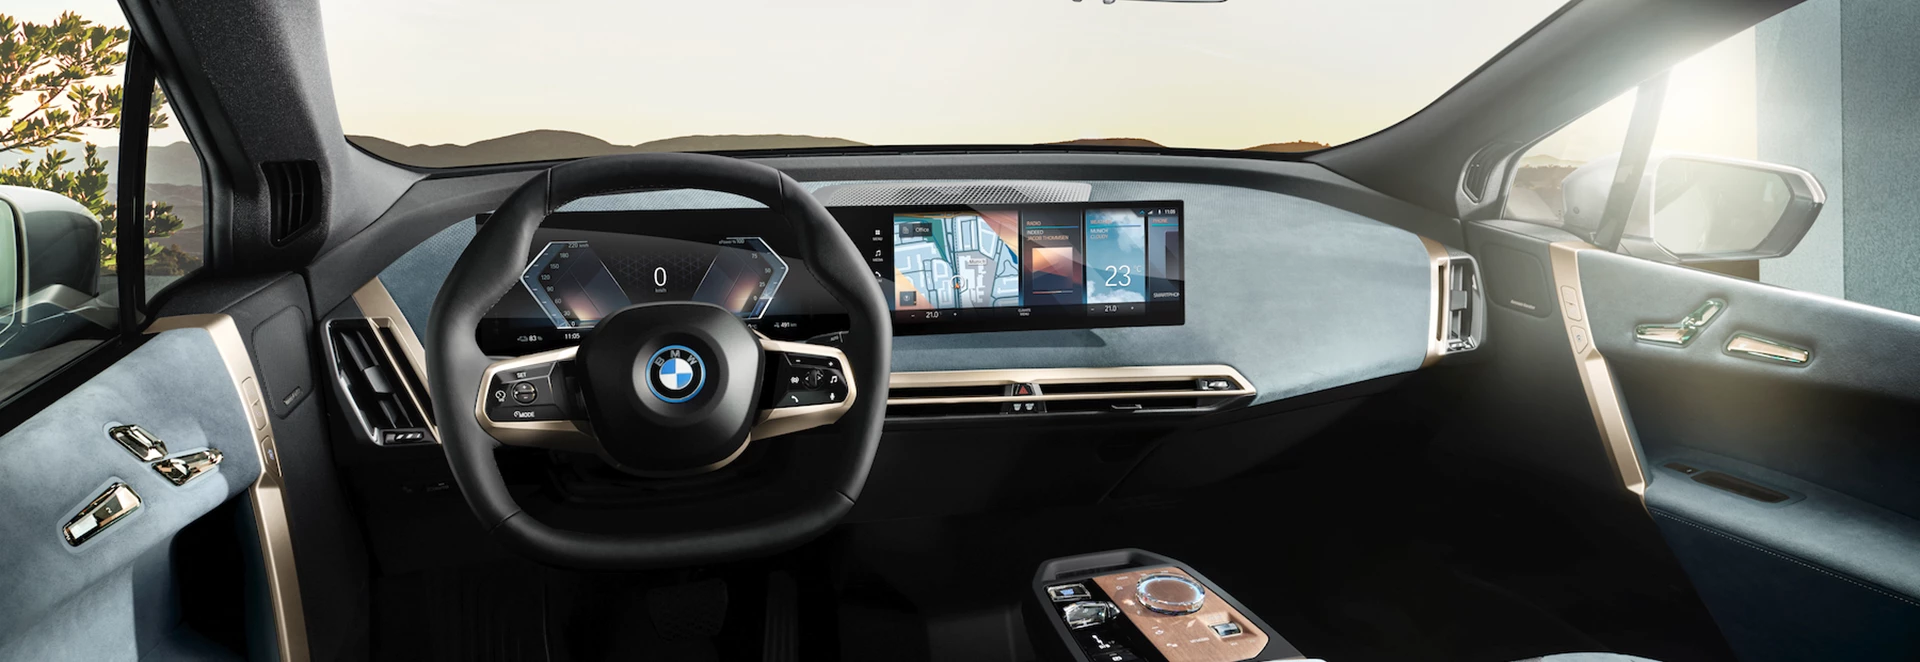 BMW reveals new iDrive media system to digitalise its cars further 